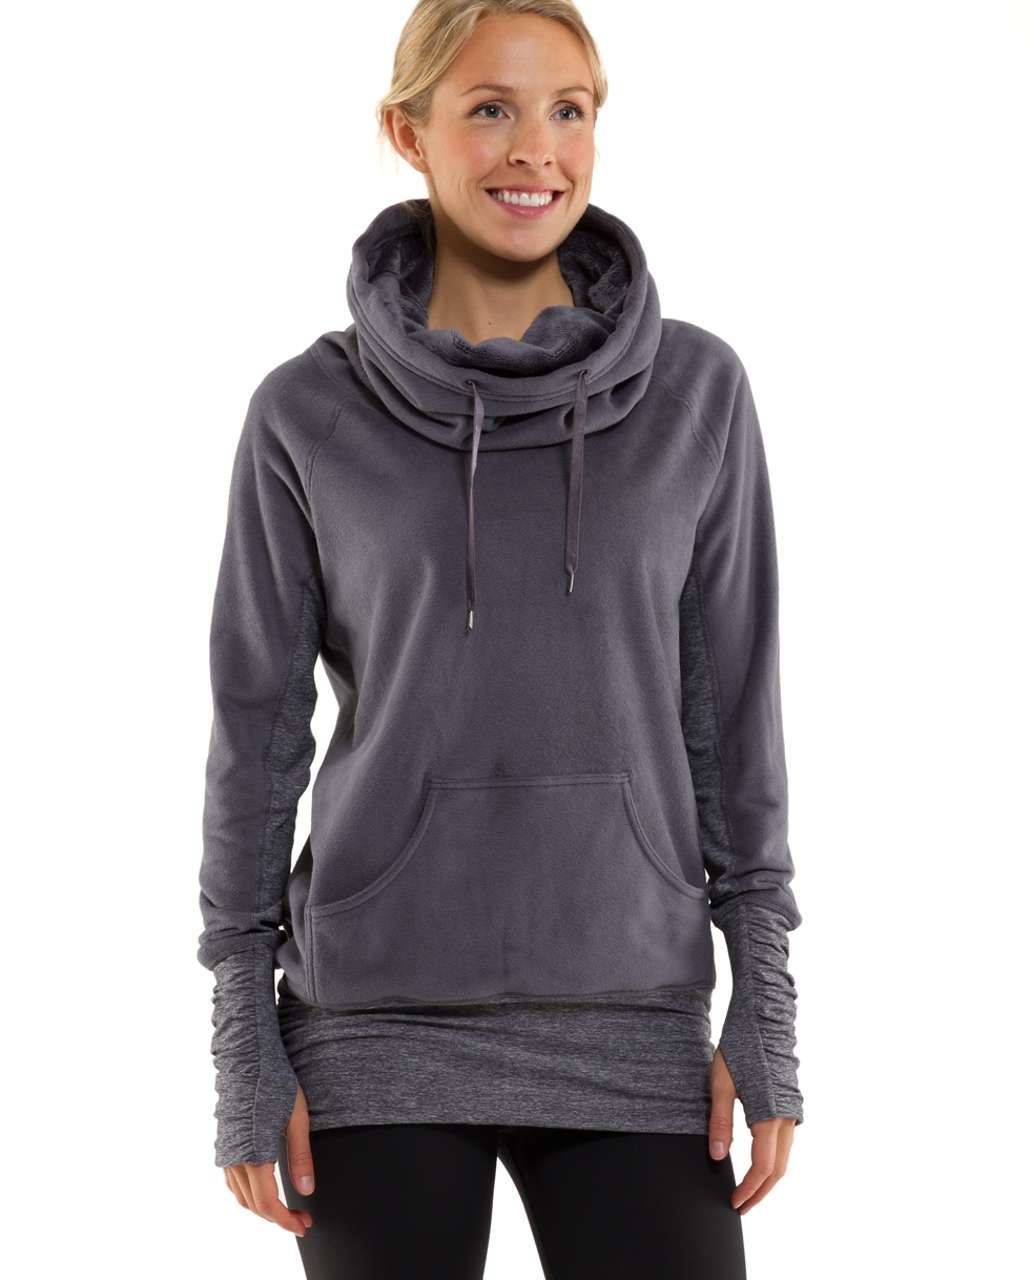 Lululemon Don’t Hurry Be Happy Pullover - Coal / Heathered Coal